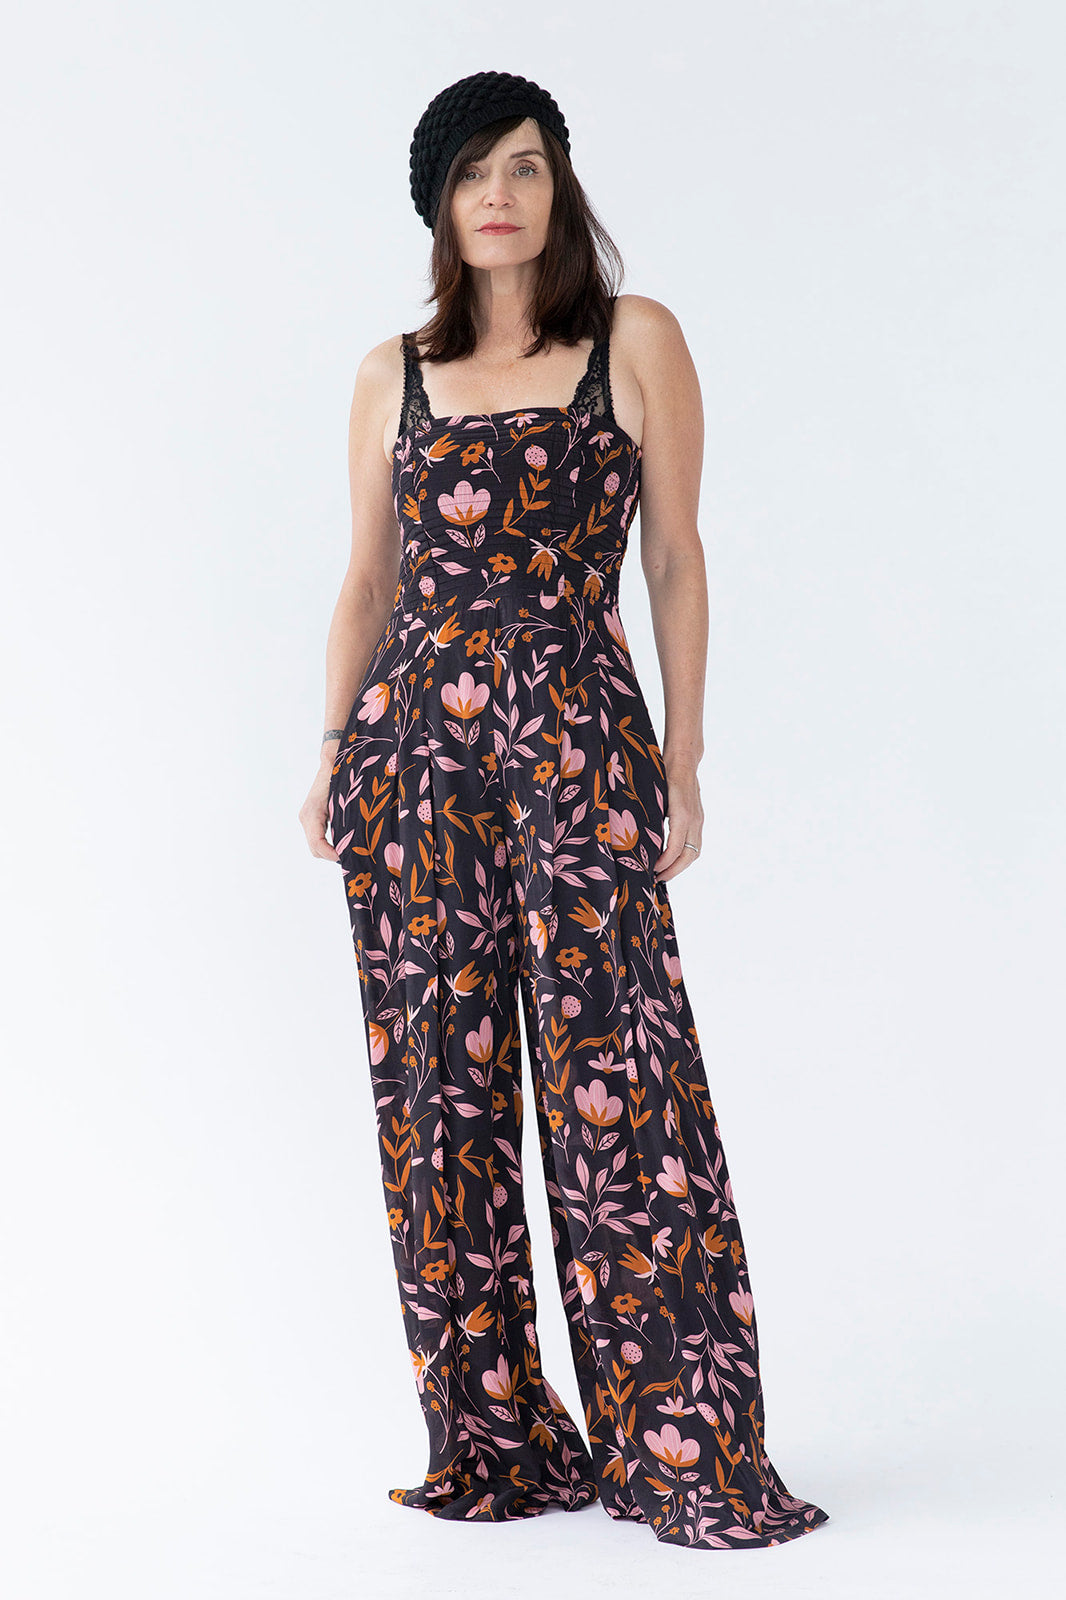 How to style a strapless jumpsuit